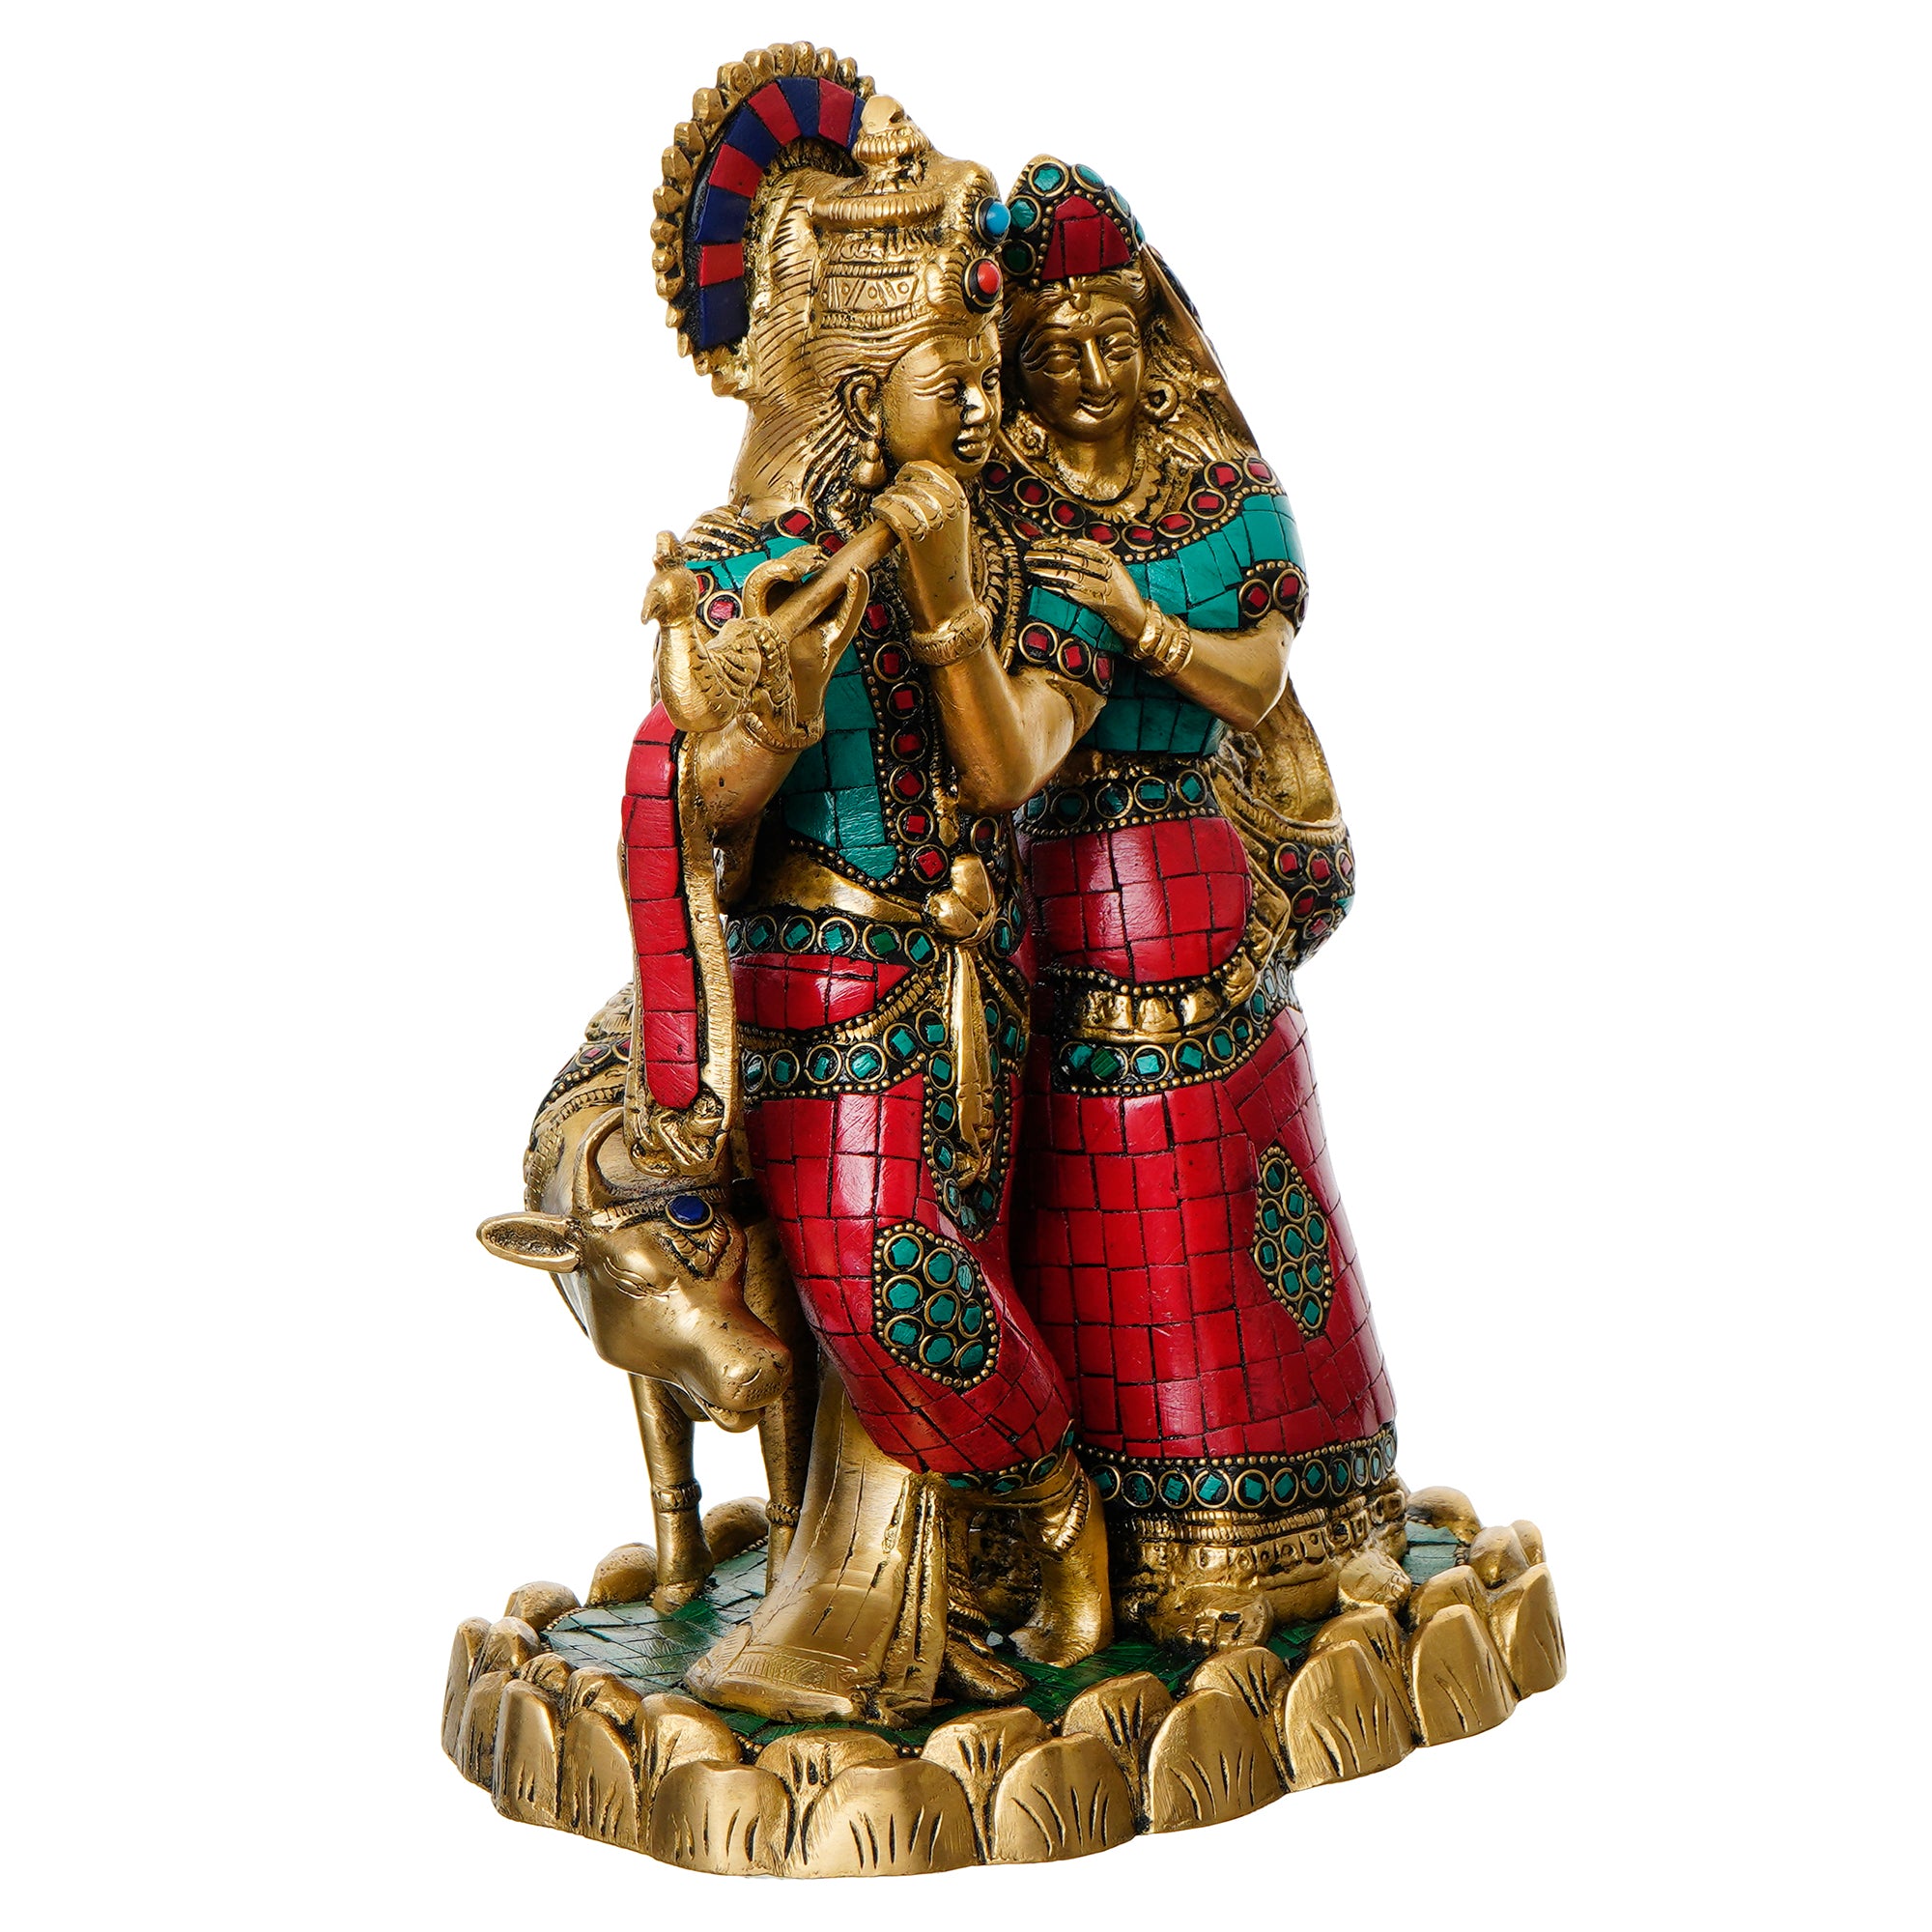 Colorful Stone Work Brass Radha Krishna Statue with Cow Figurine (Gold, Green, Red) 5